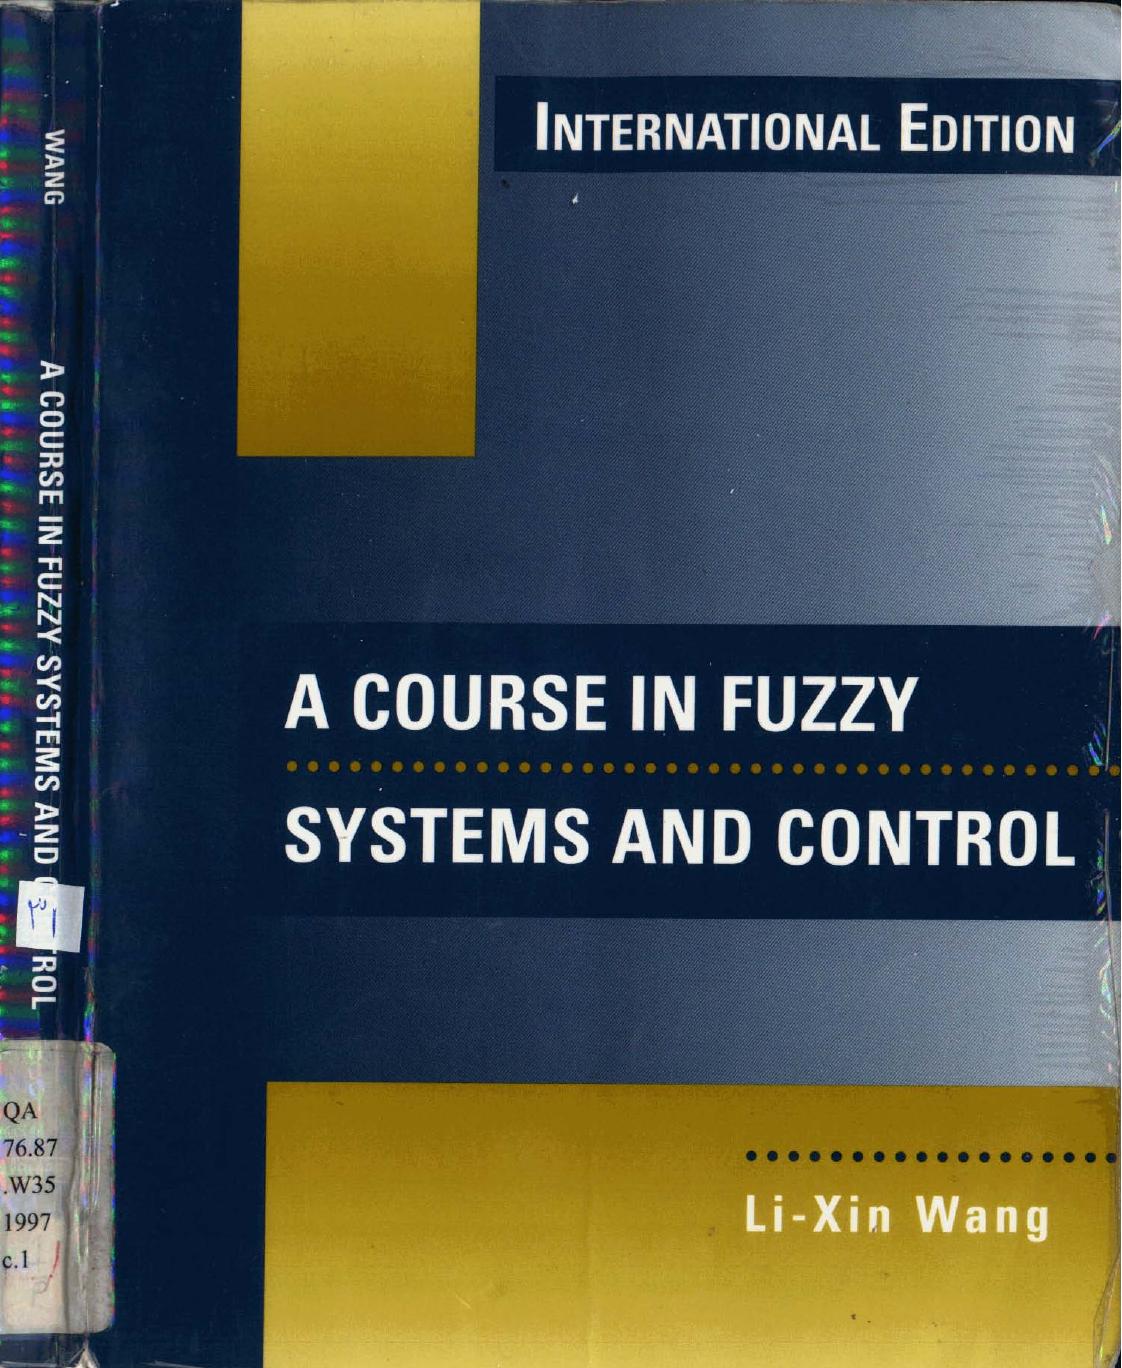 A Course in Fuzzy Systems and Control